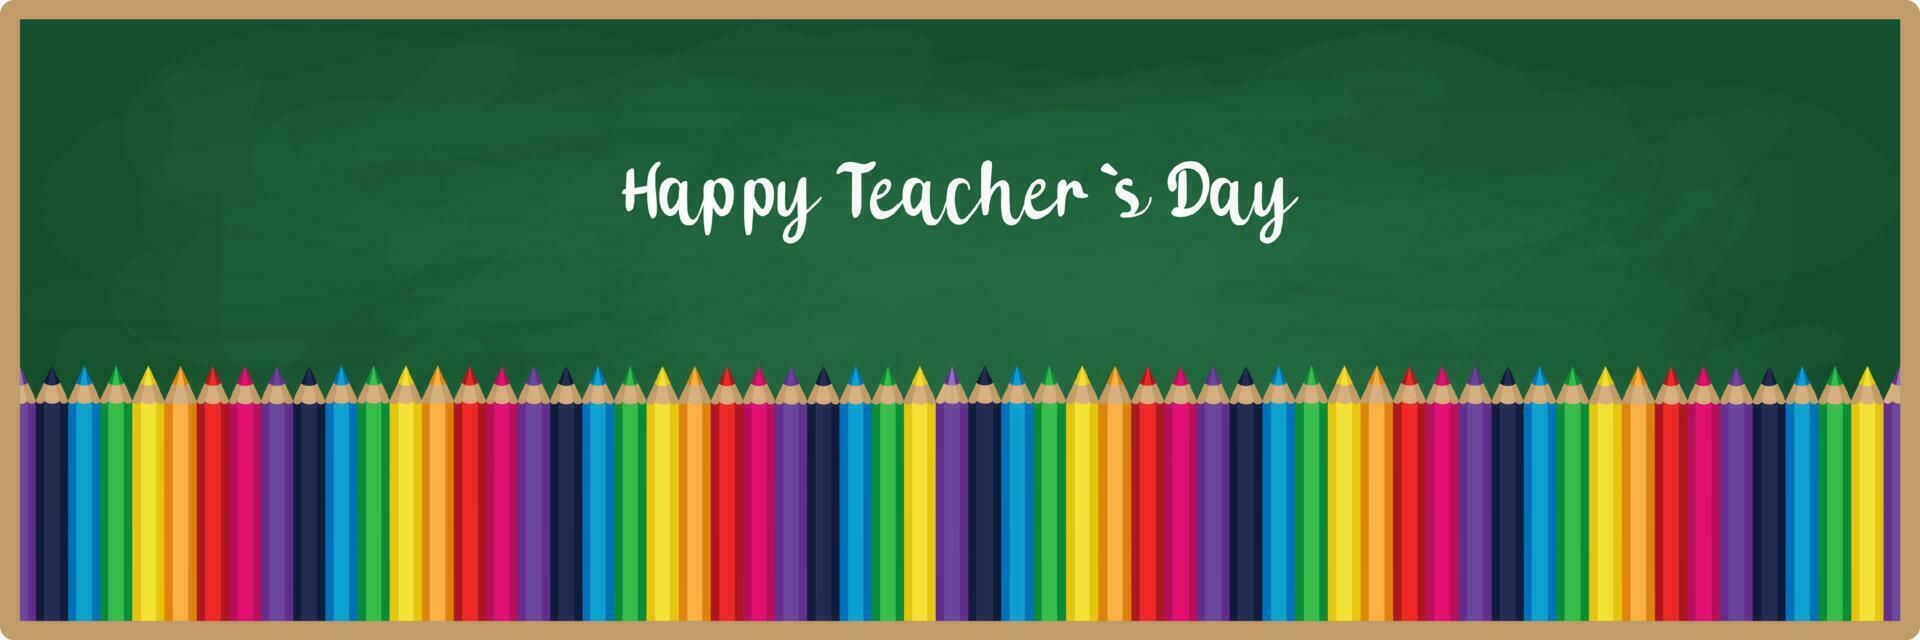 Happy teachers day vector illustration with chalk board, colorful crayons, pencils and pens. Typography design with chalk letters for greeting card or web banner.